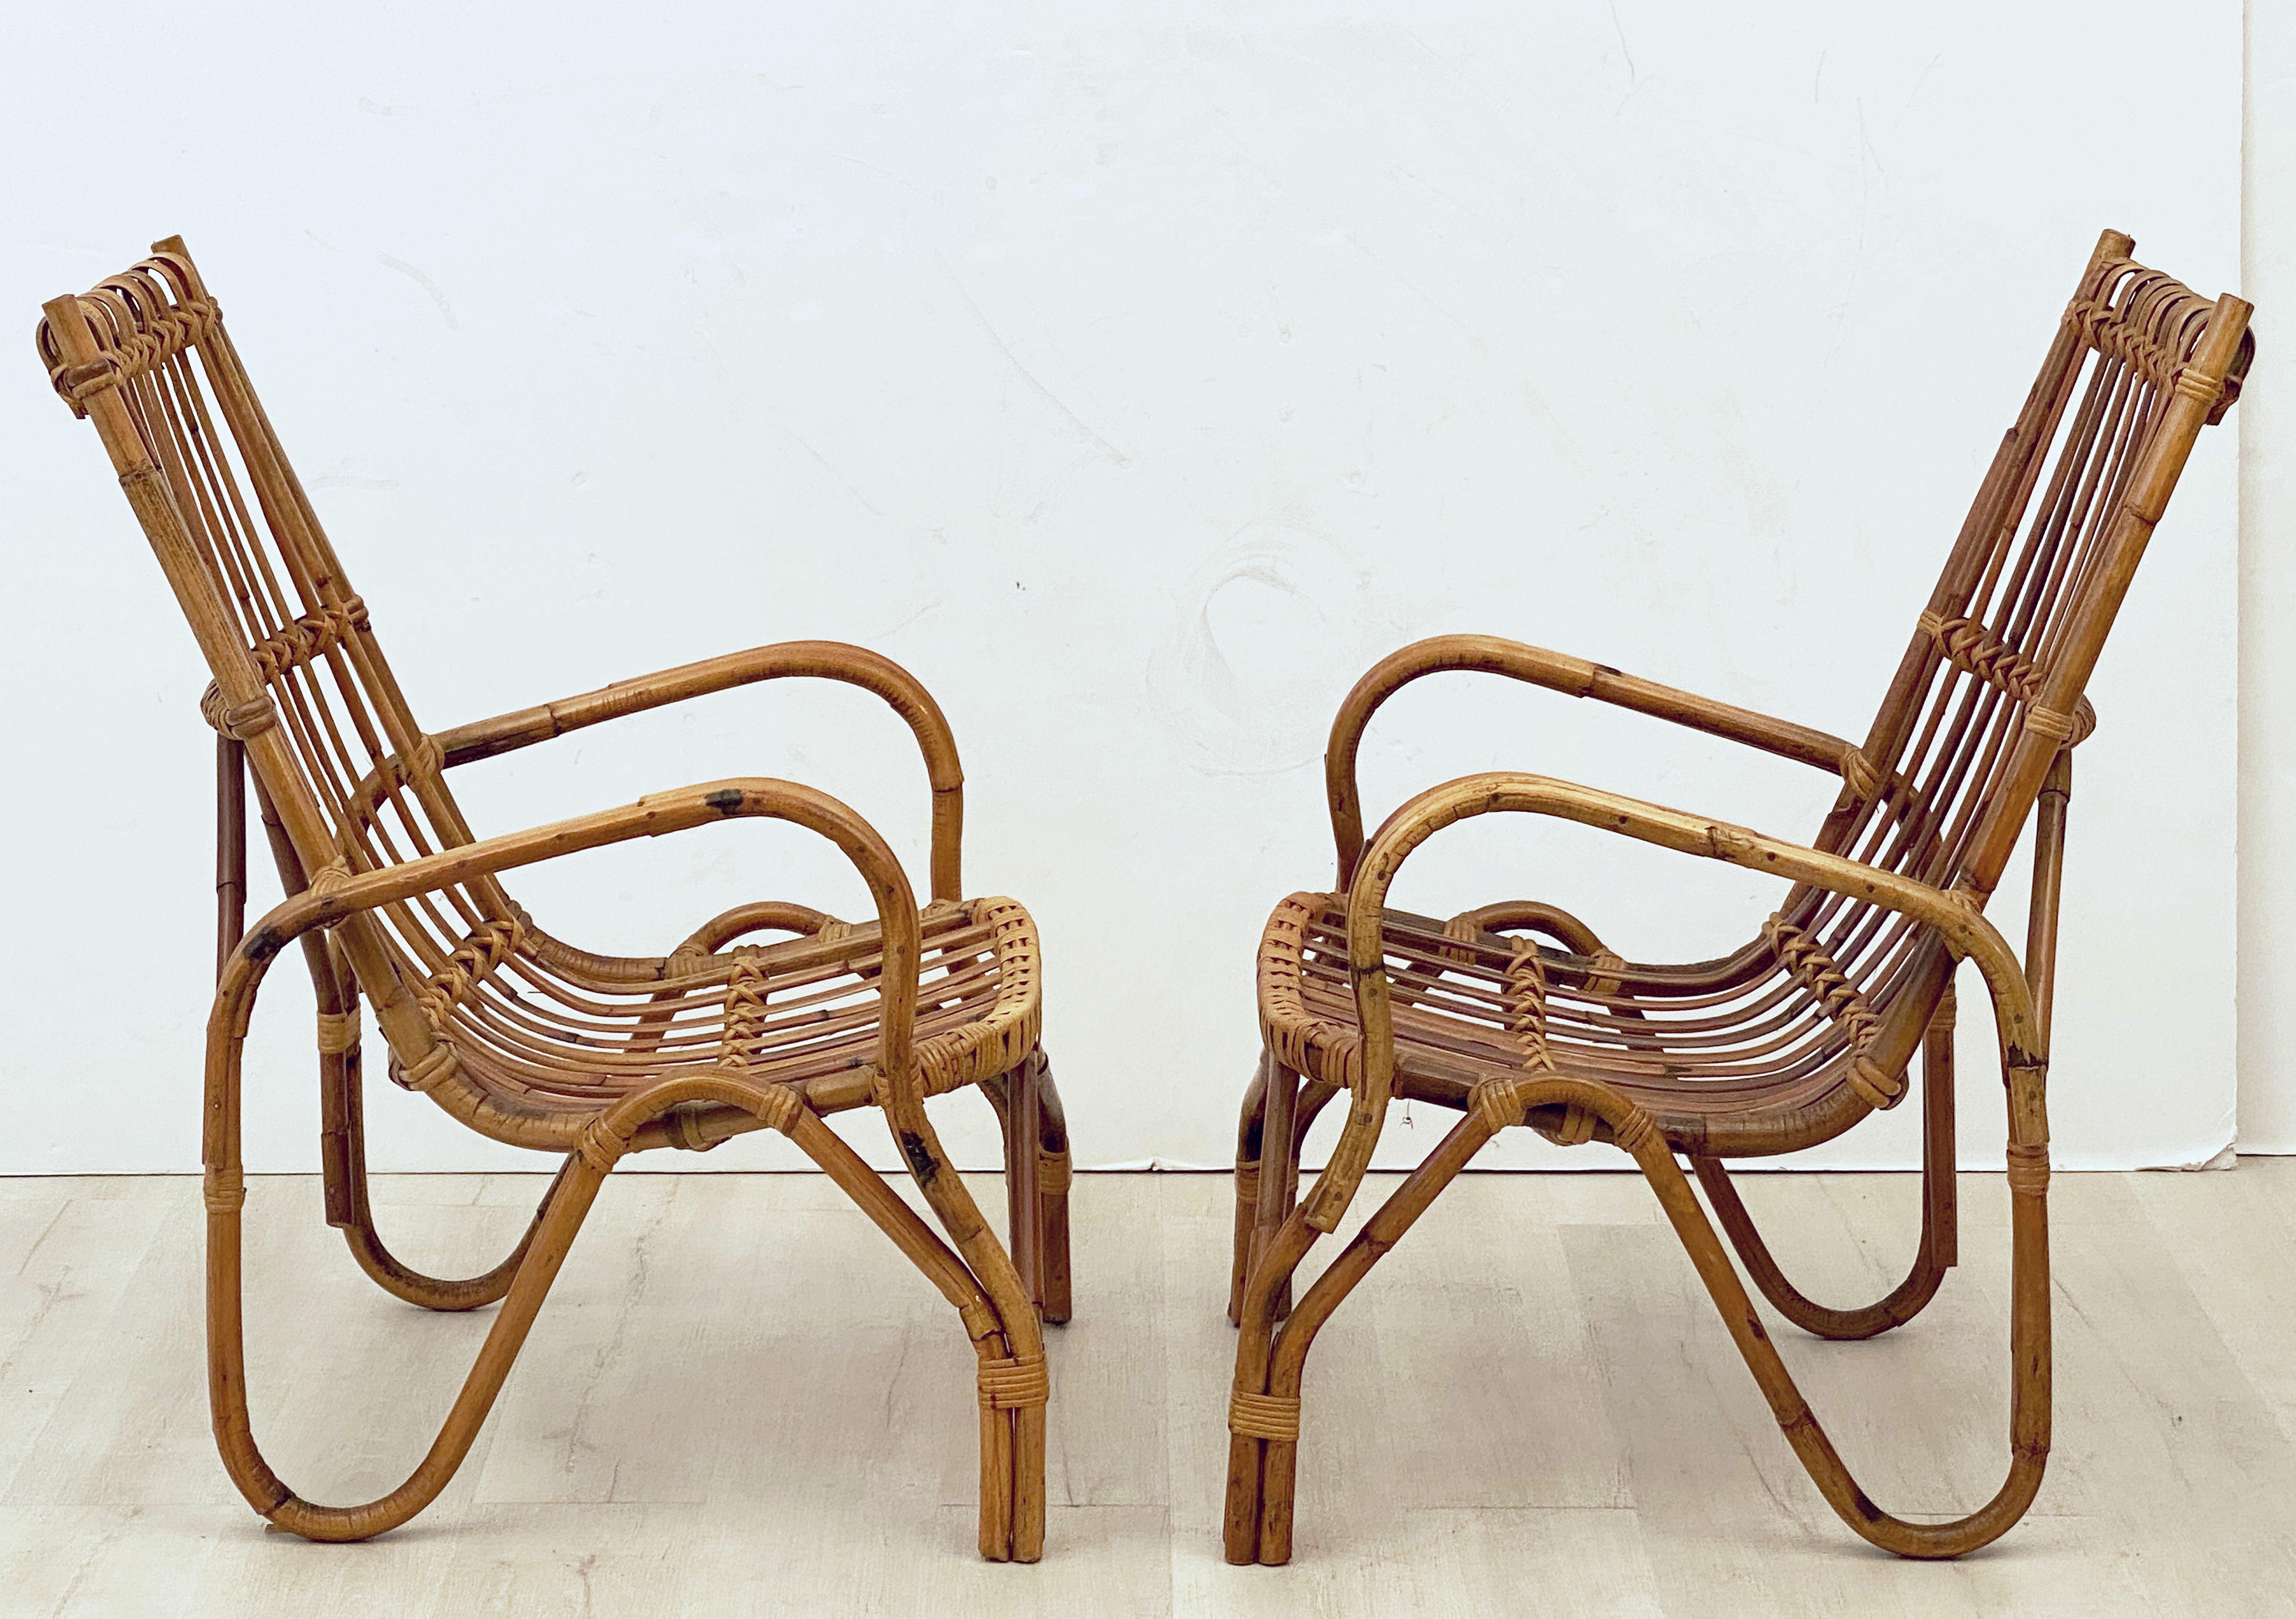 A fine pair of vintage French rattan lounge armchairs, each chair featuring a stylish design and comfortable seating.

Two available, individually priced, $2495 each chair.